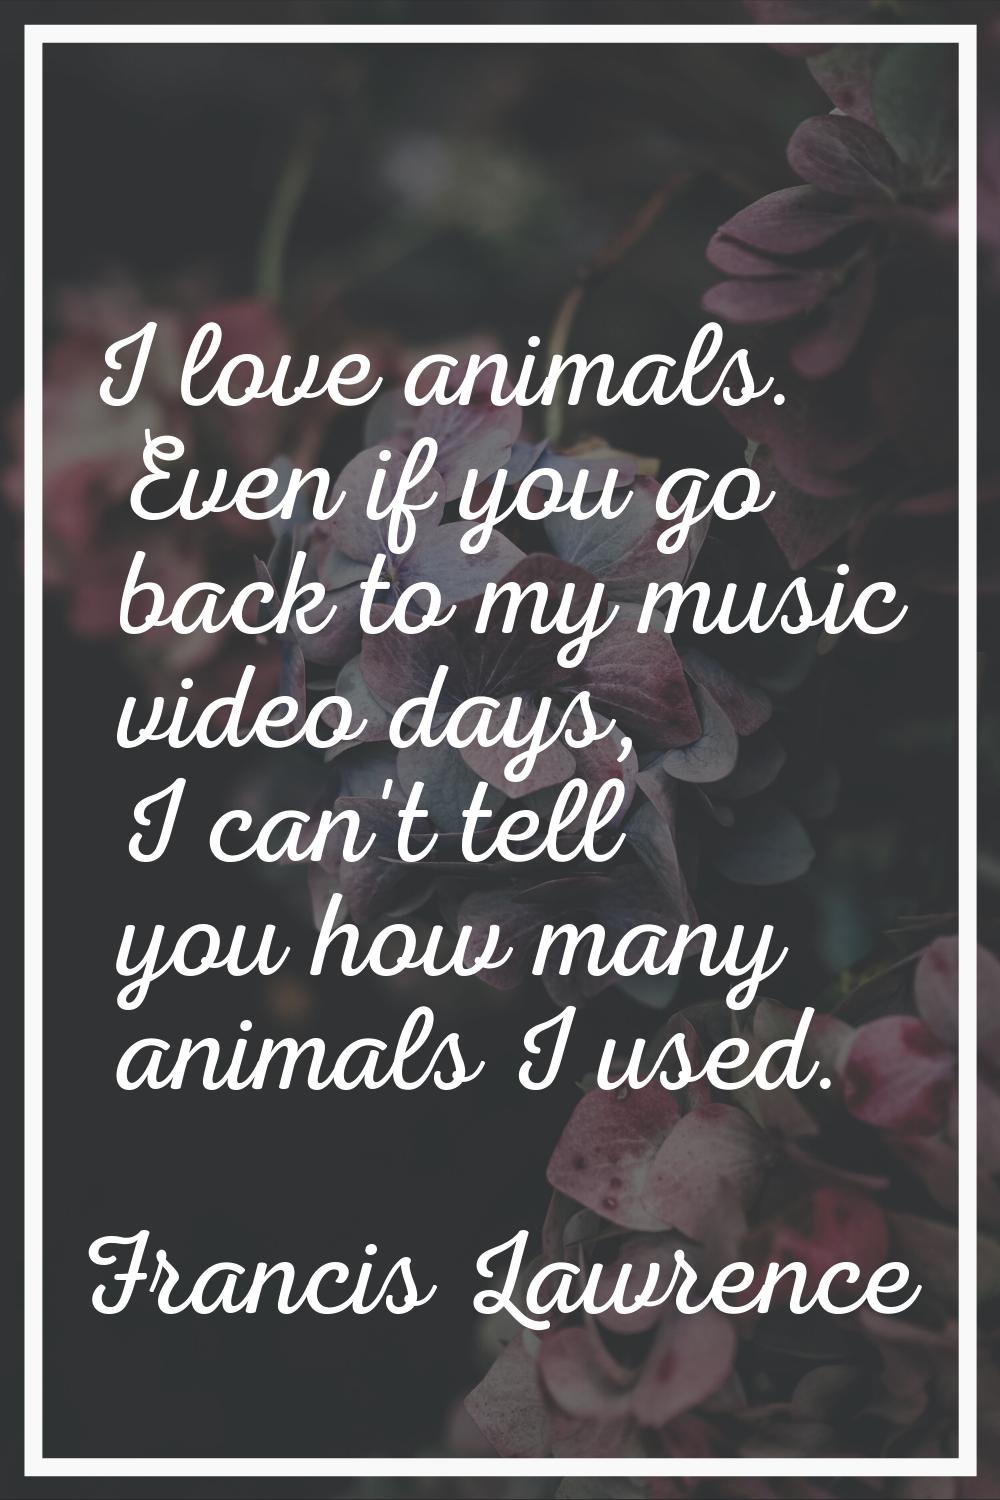 I love animals. Even if you go back to my music video days, I can't tell you how many animals I use